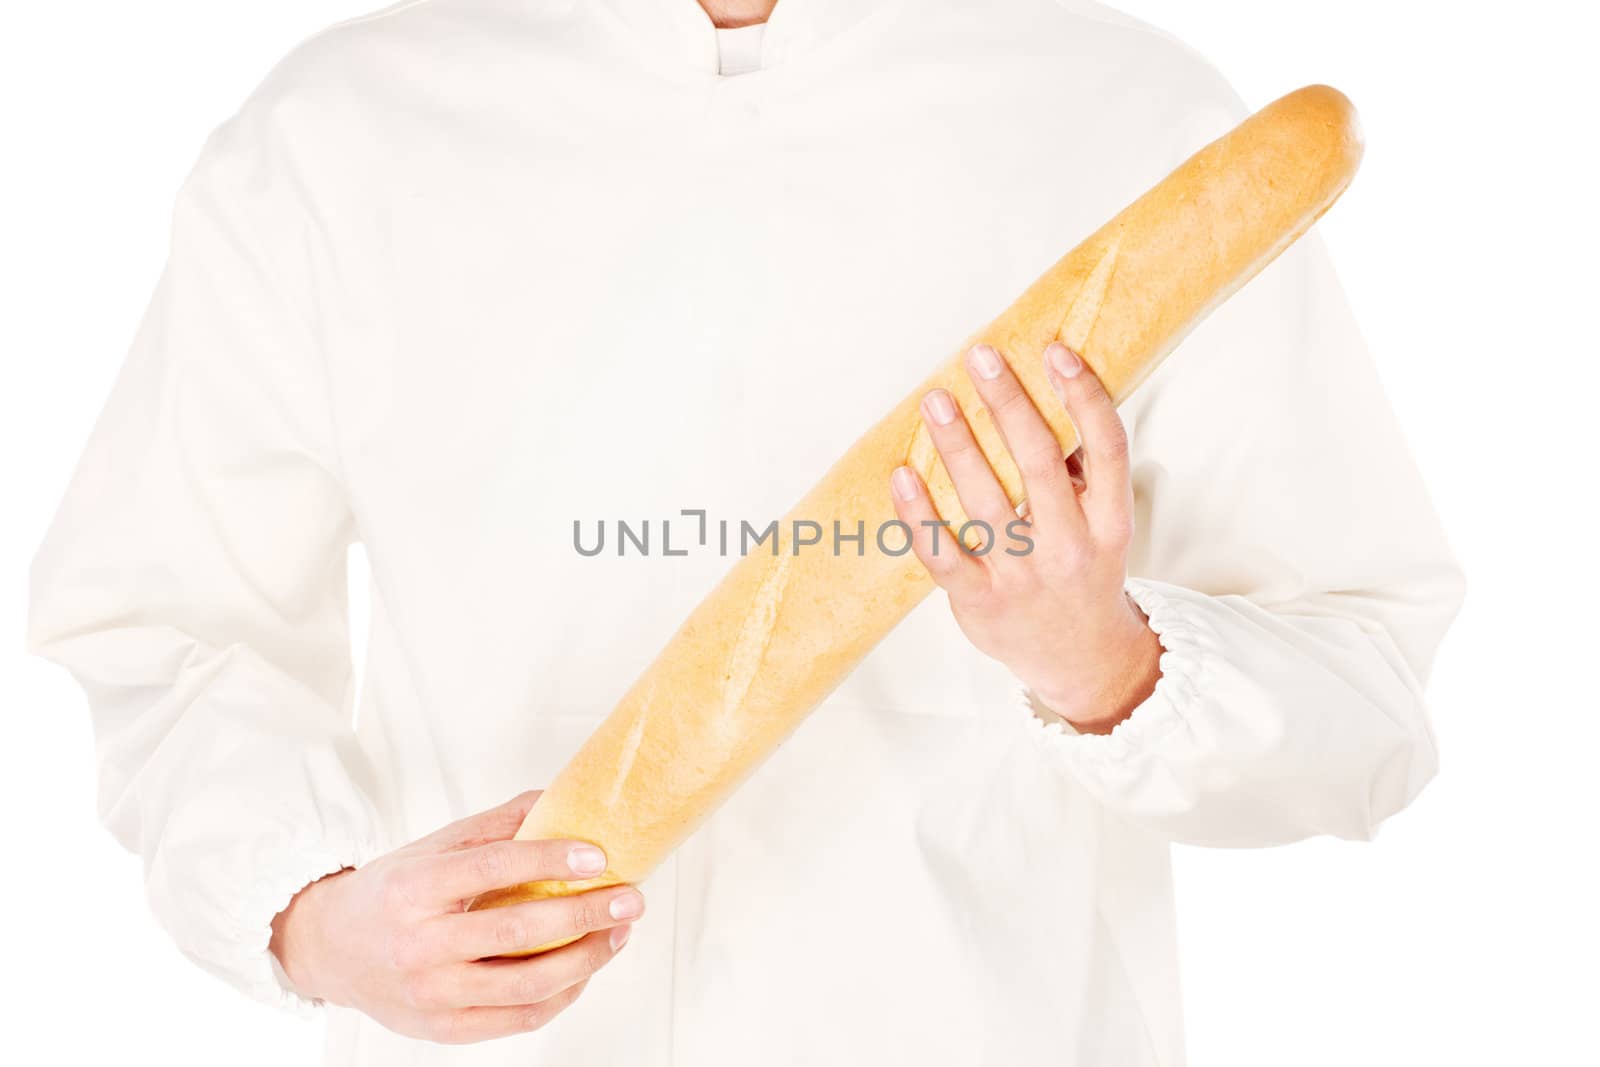 baguette in a hands of a backer, isolated on white